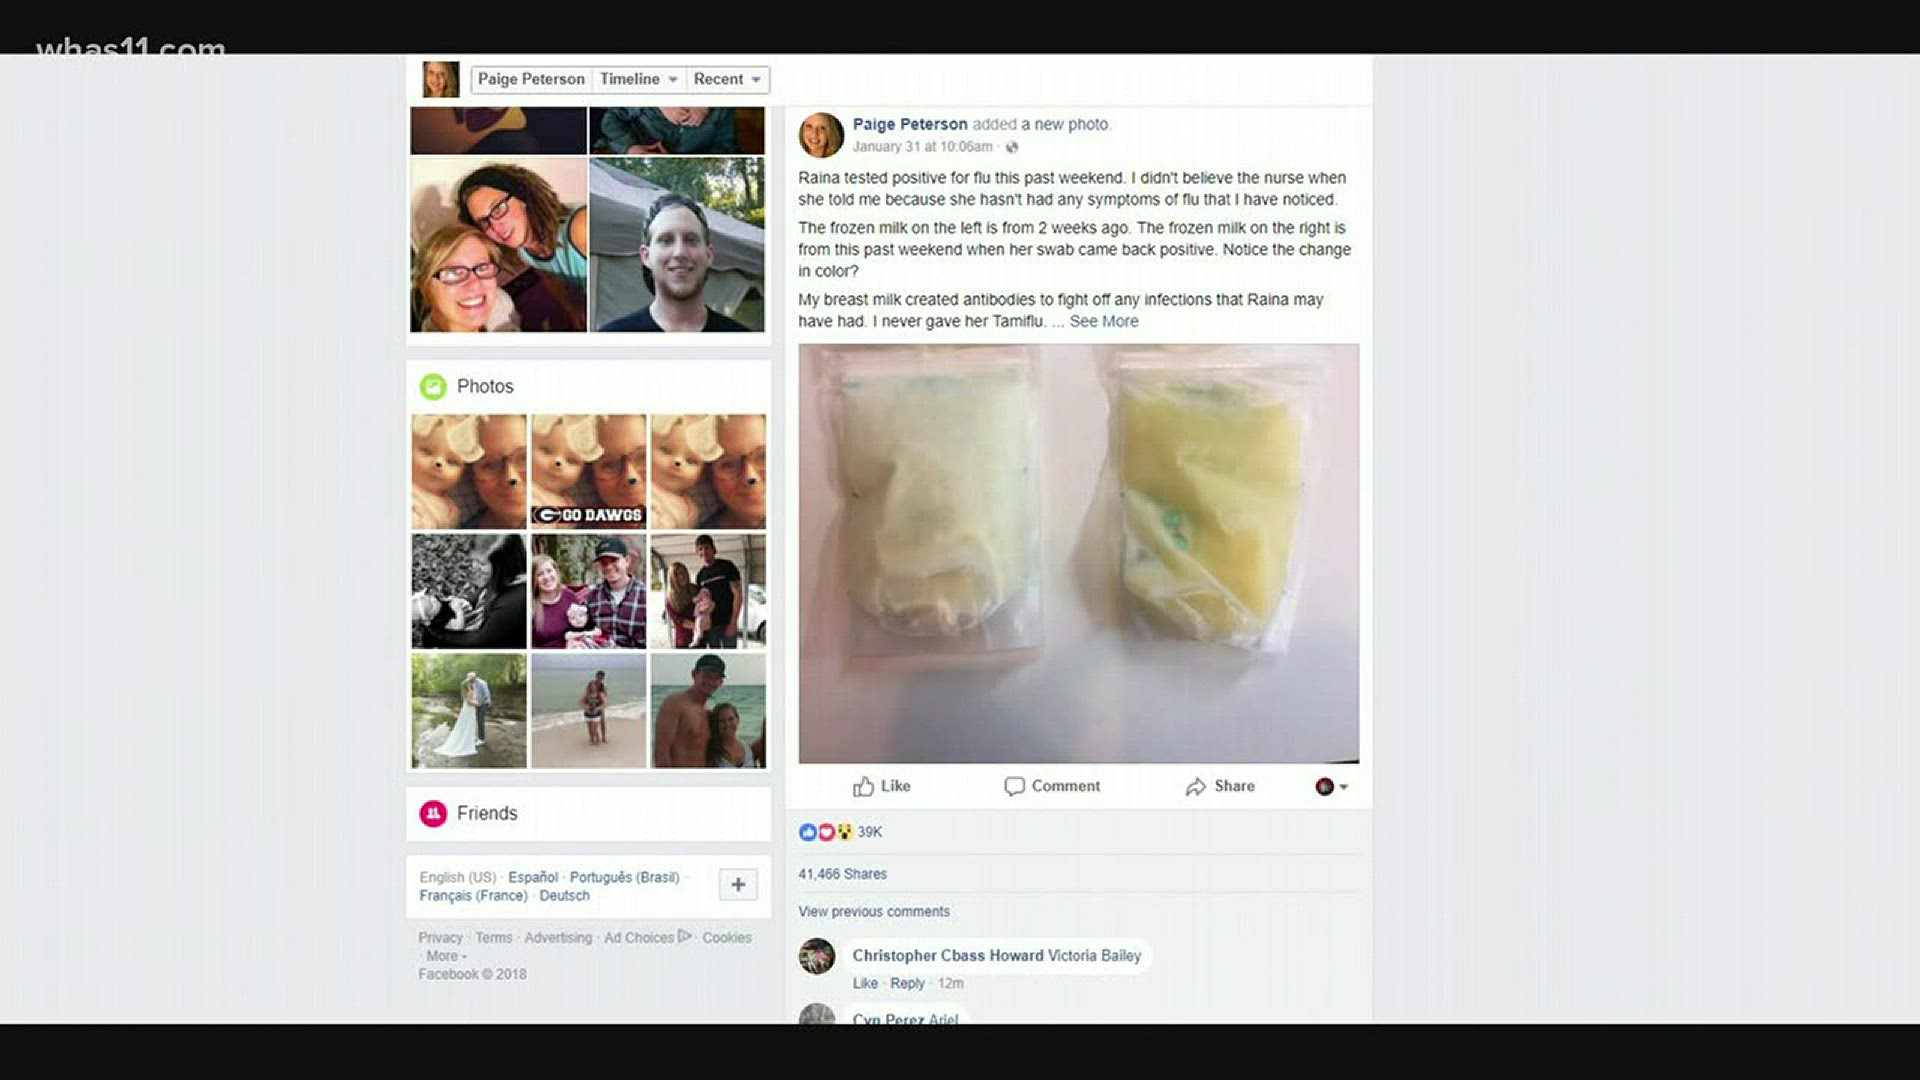 There's a Facebook post making the rounds from a mother who claims her breast milk drastically changed when her 4-month-old daughter got sick with the flu.